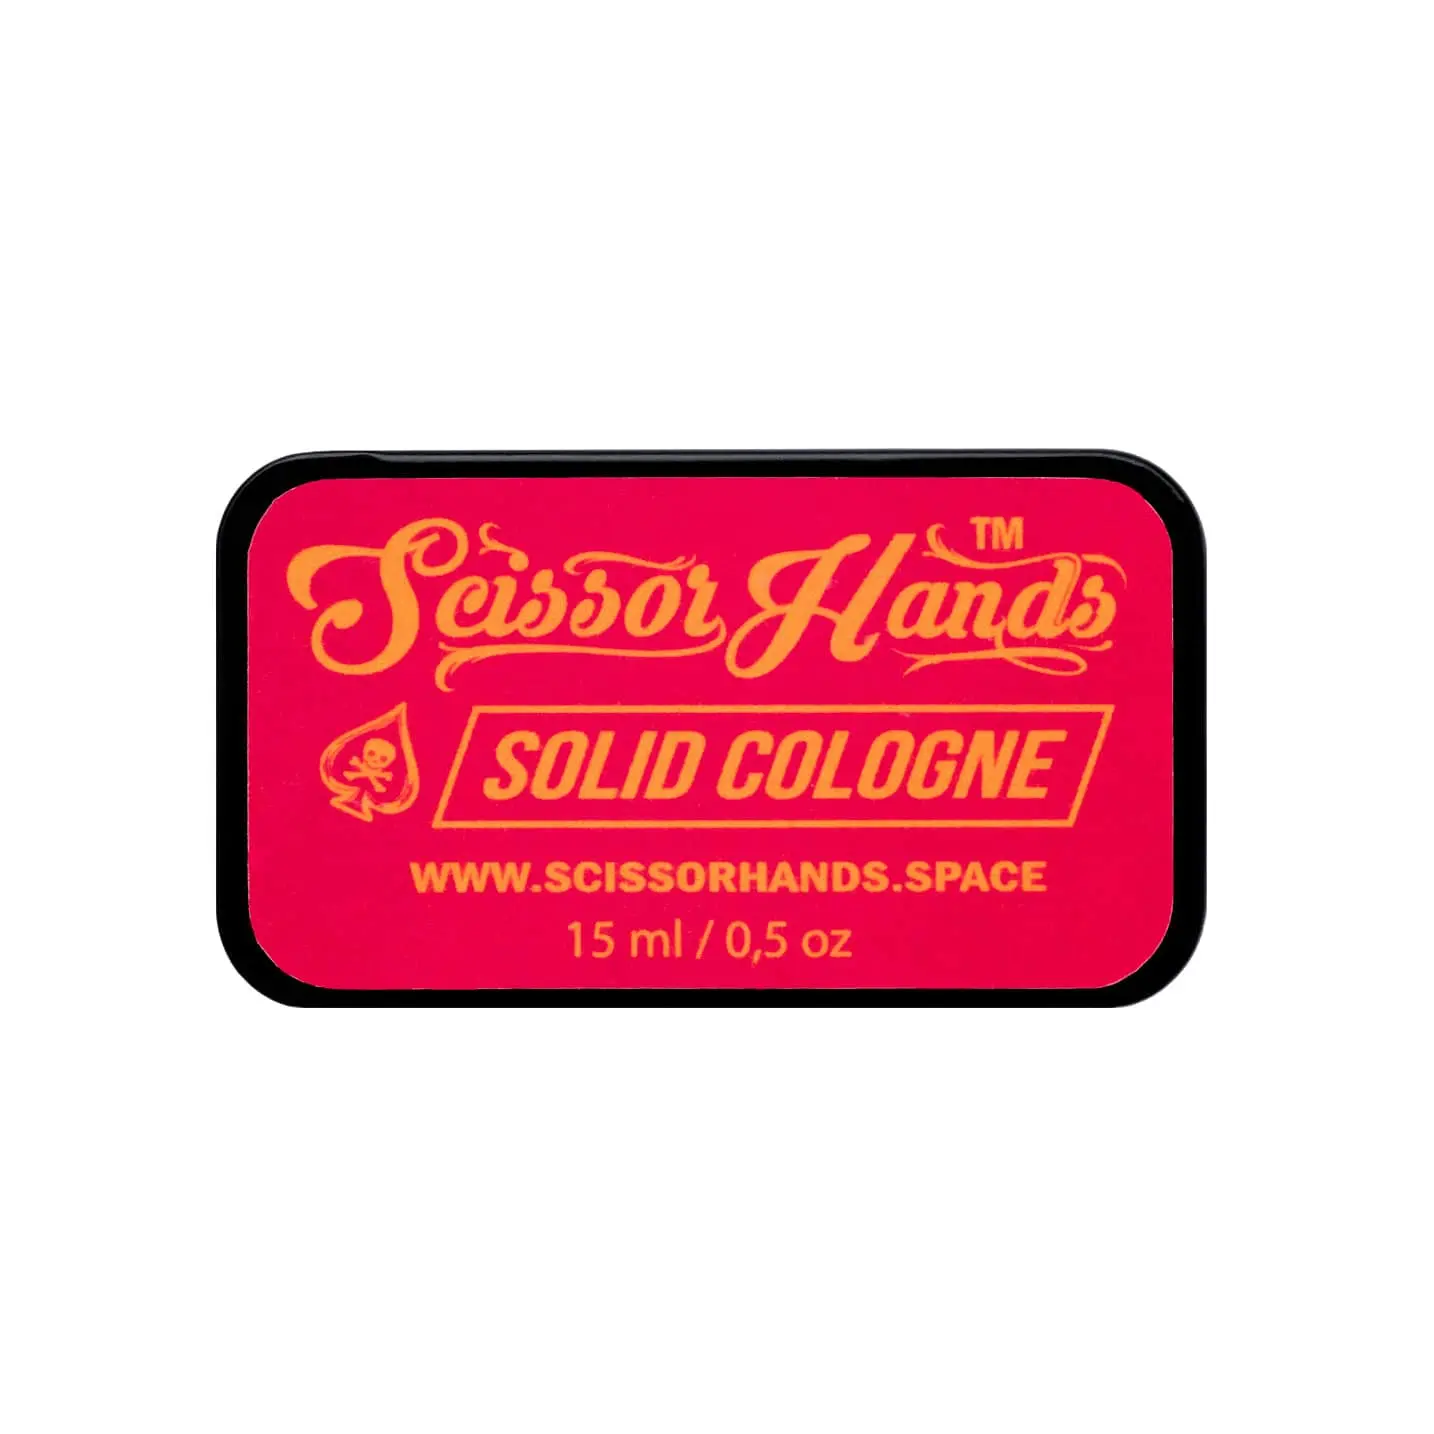 Solid cologne Pink